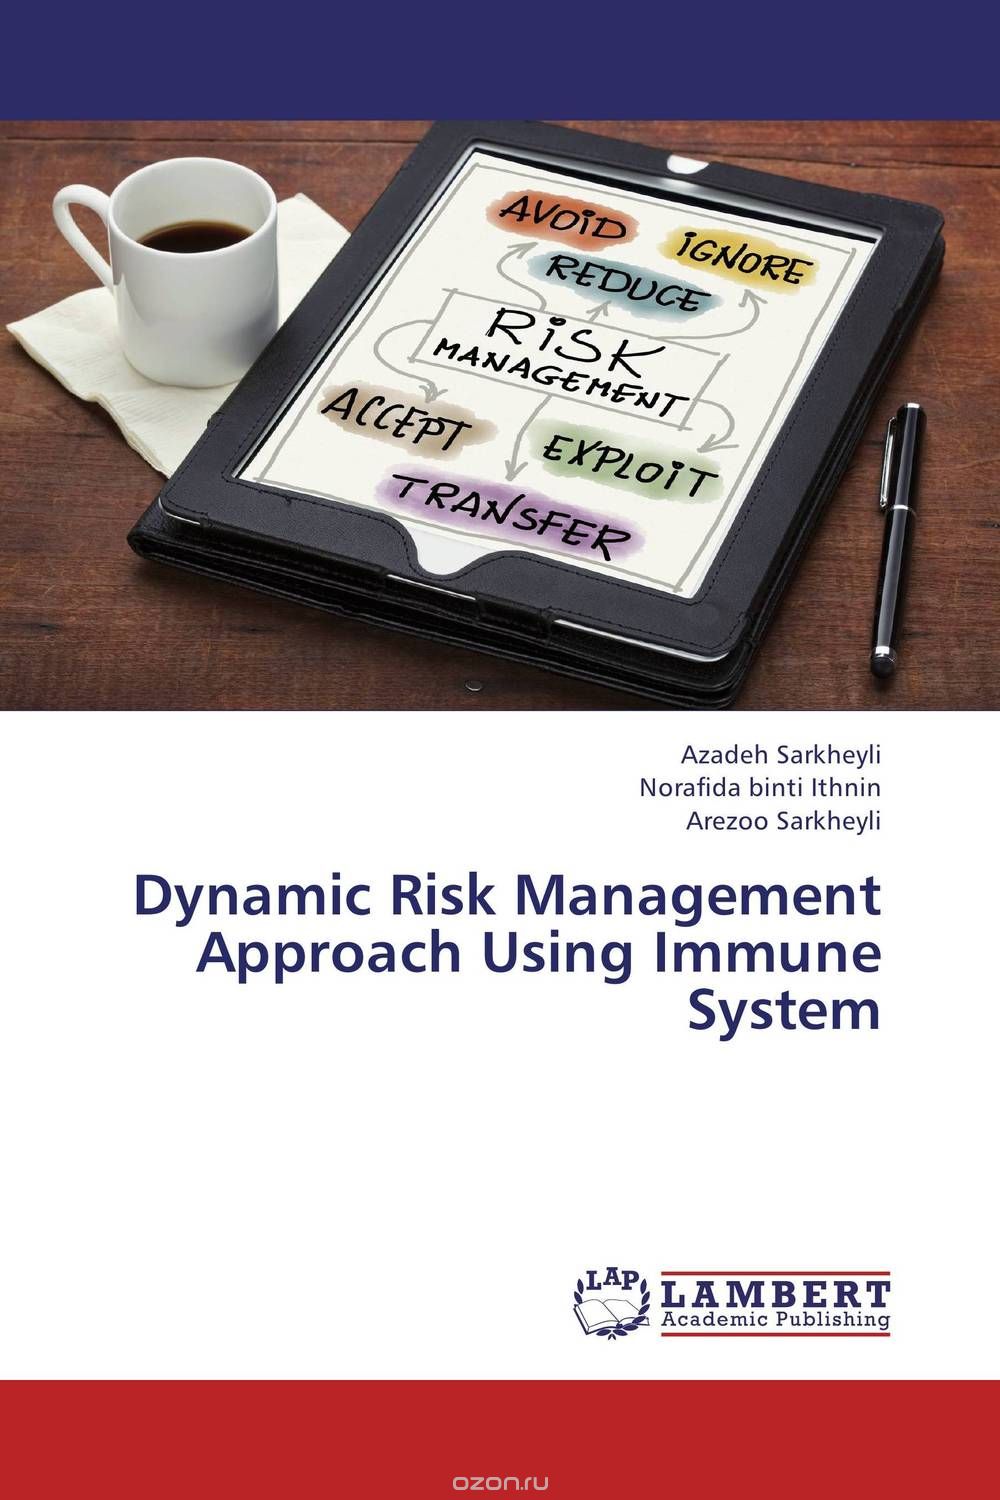 Dynamic Risk Management Approach Using Immune System